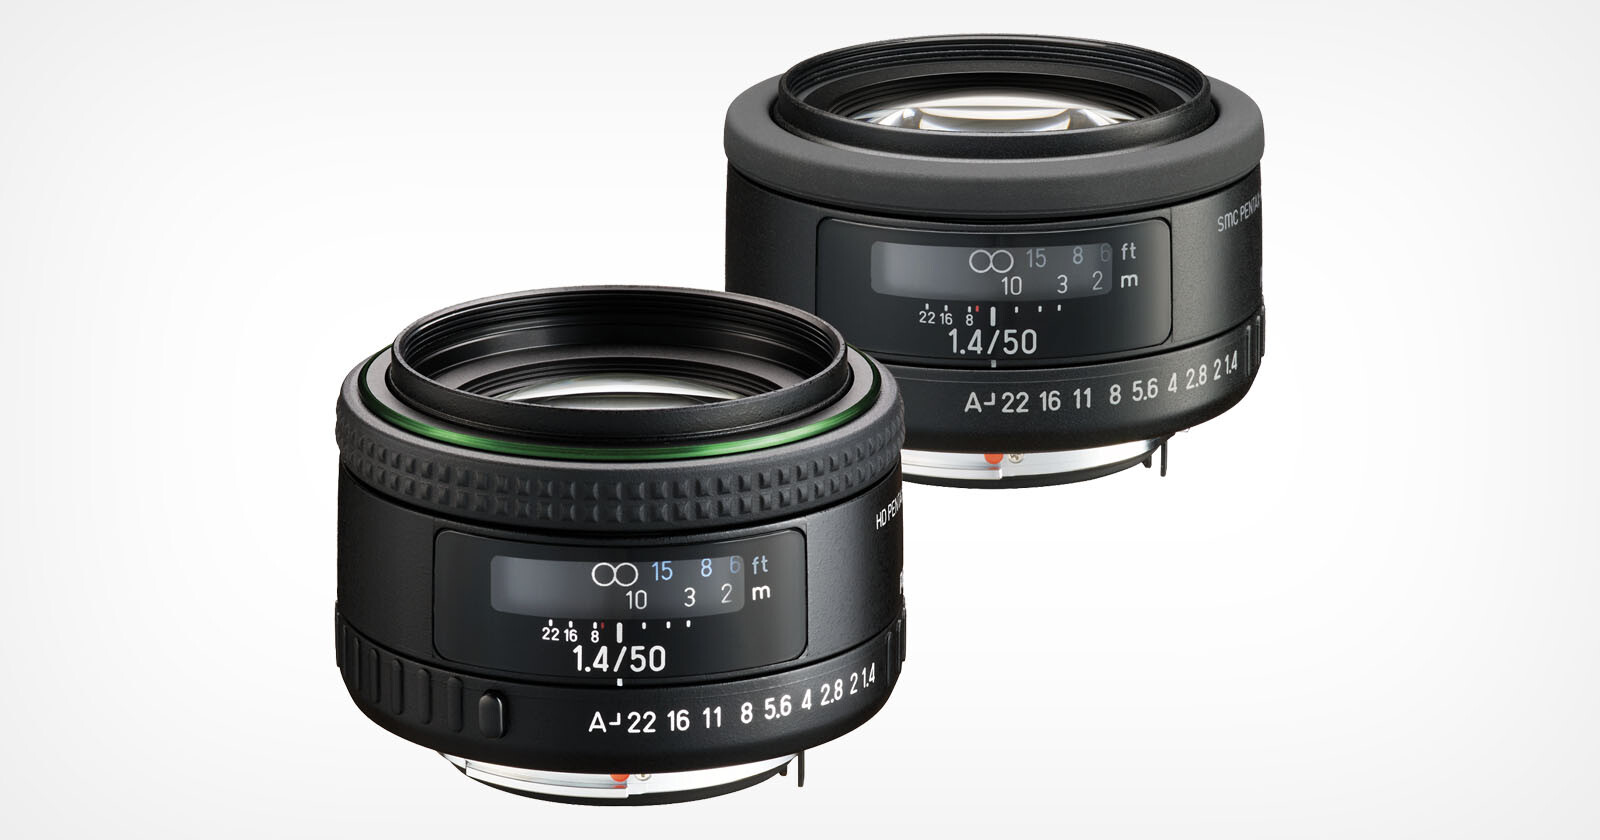 Pentax’s Two New 50mm Lenses Look Similar But Take Different Photos